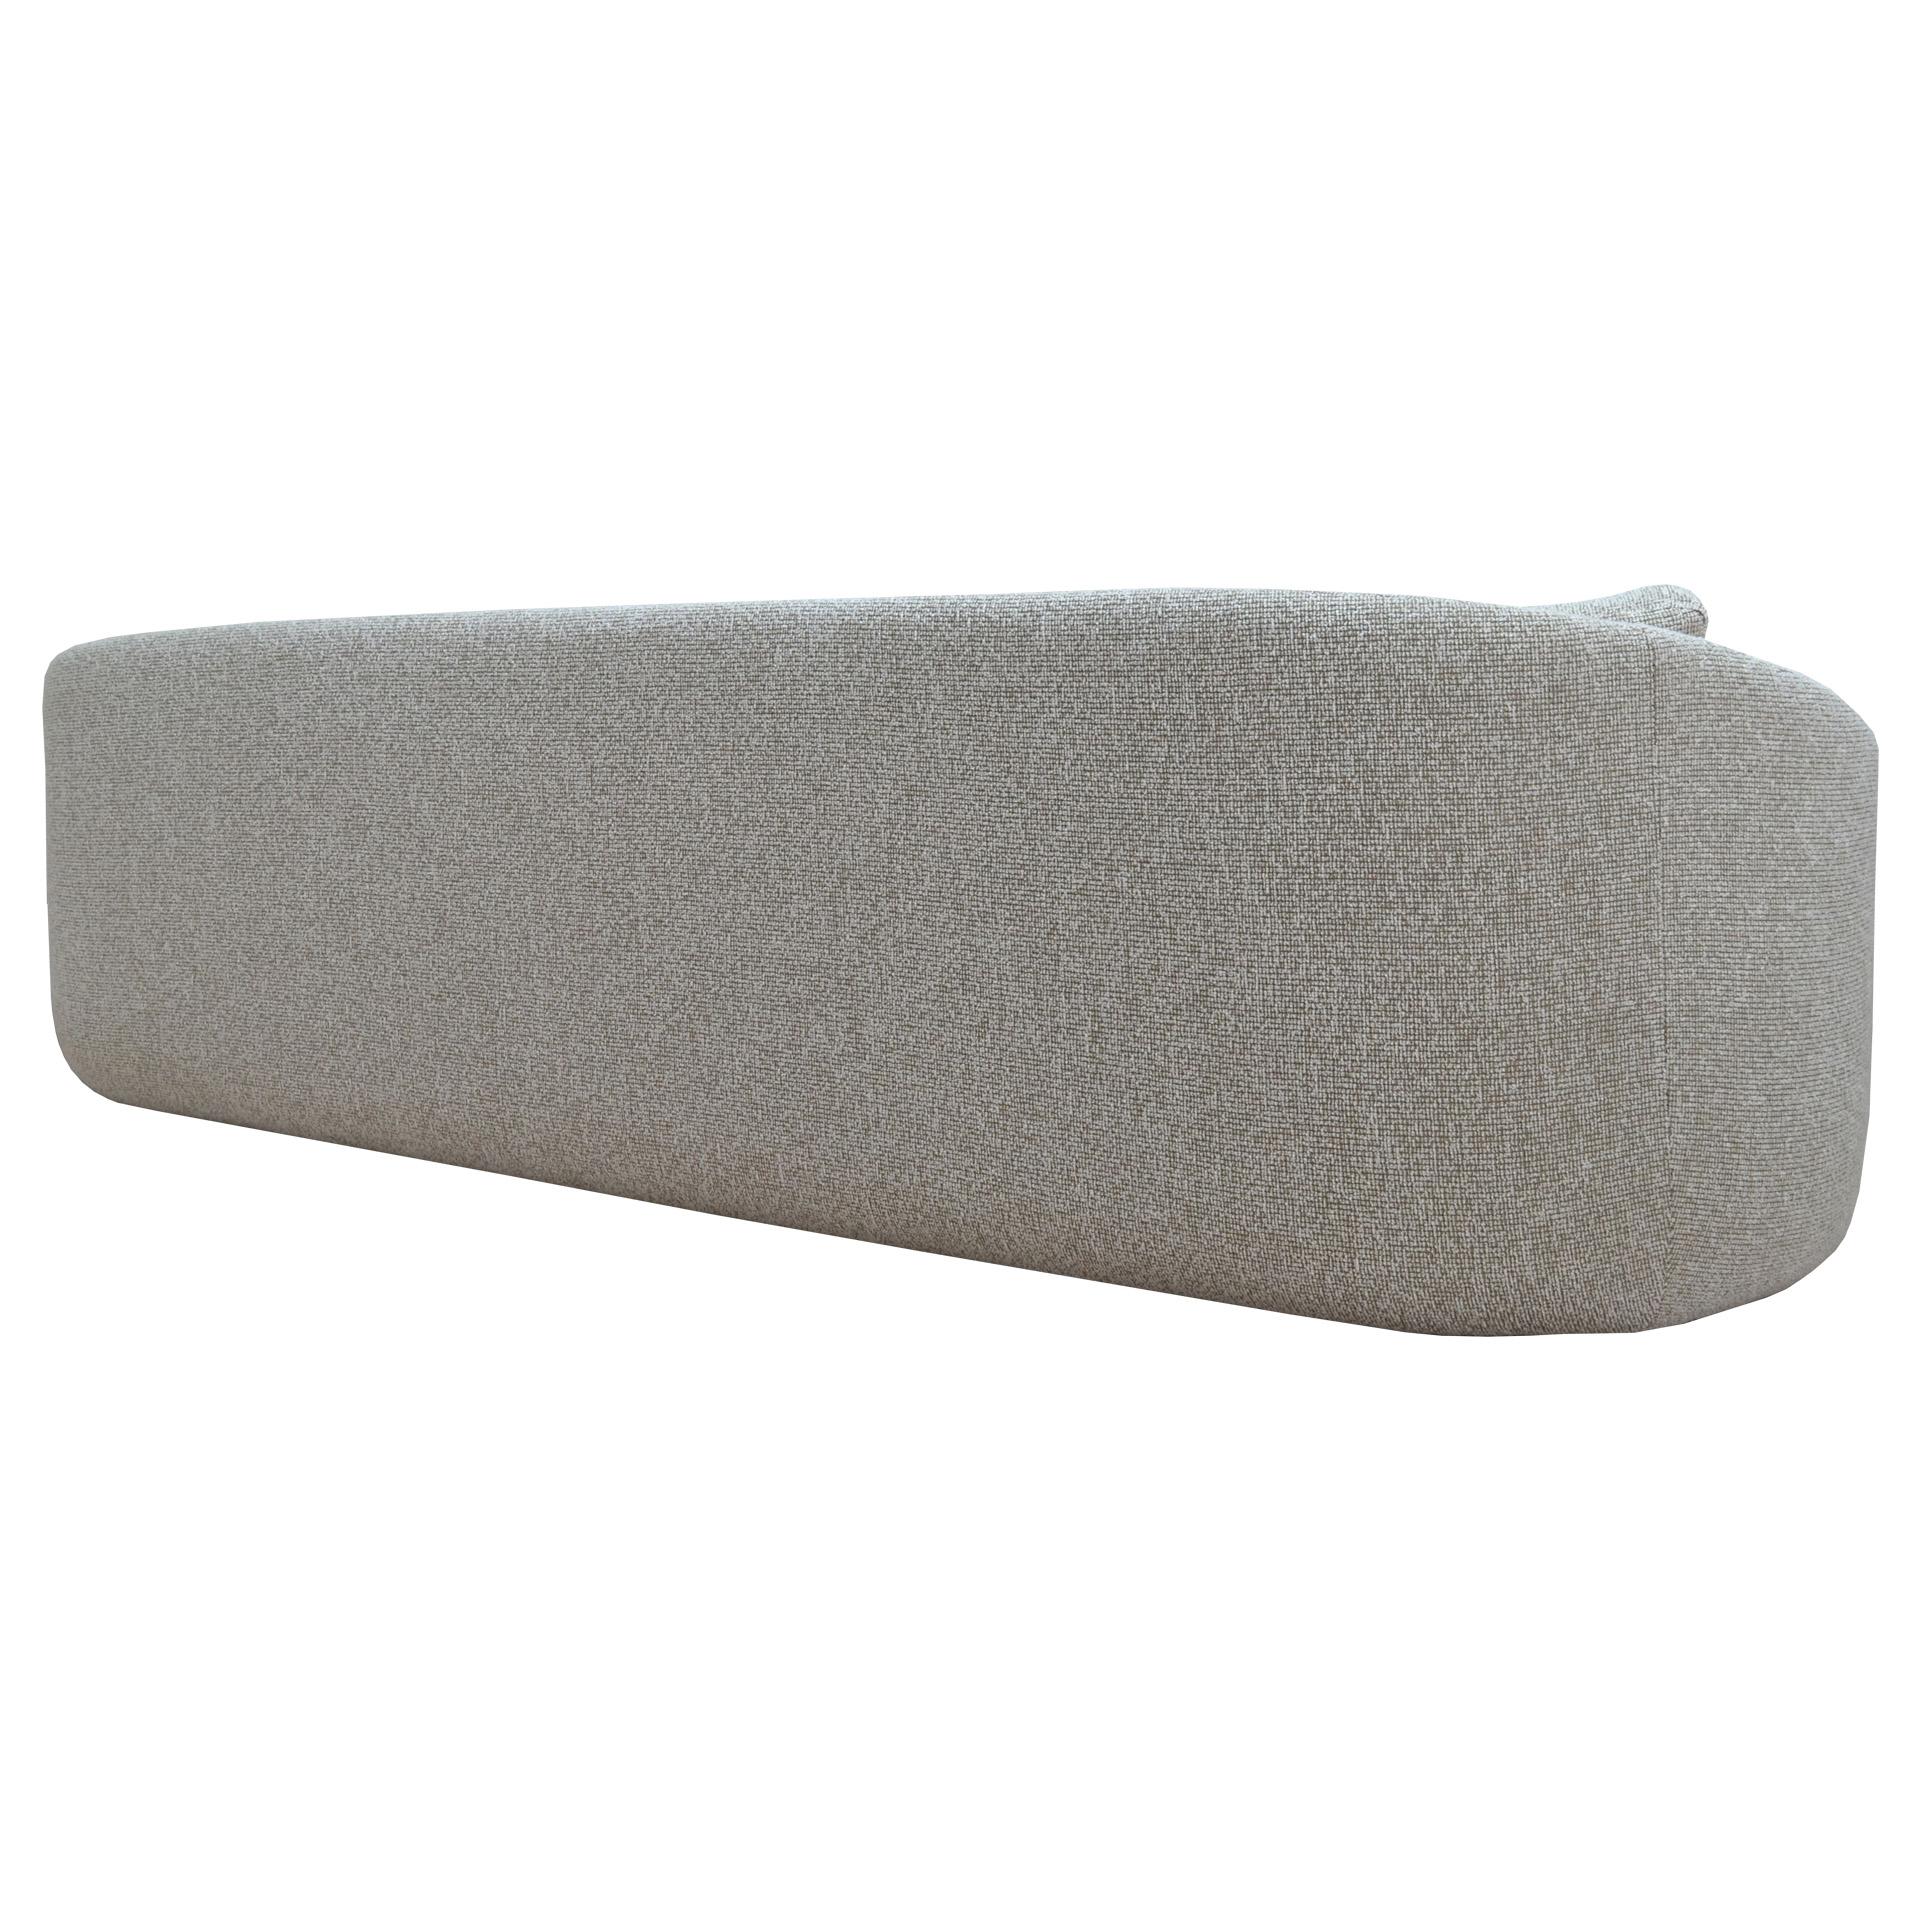 Contemporary 'Cottonflower' Sofa 280 in Torri Lana Sand Boucle For Sale